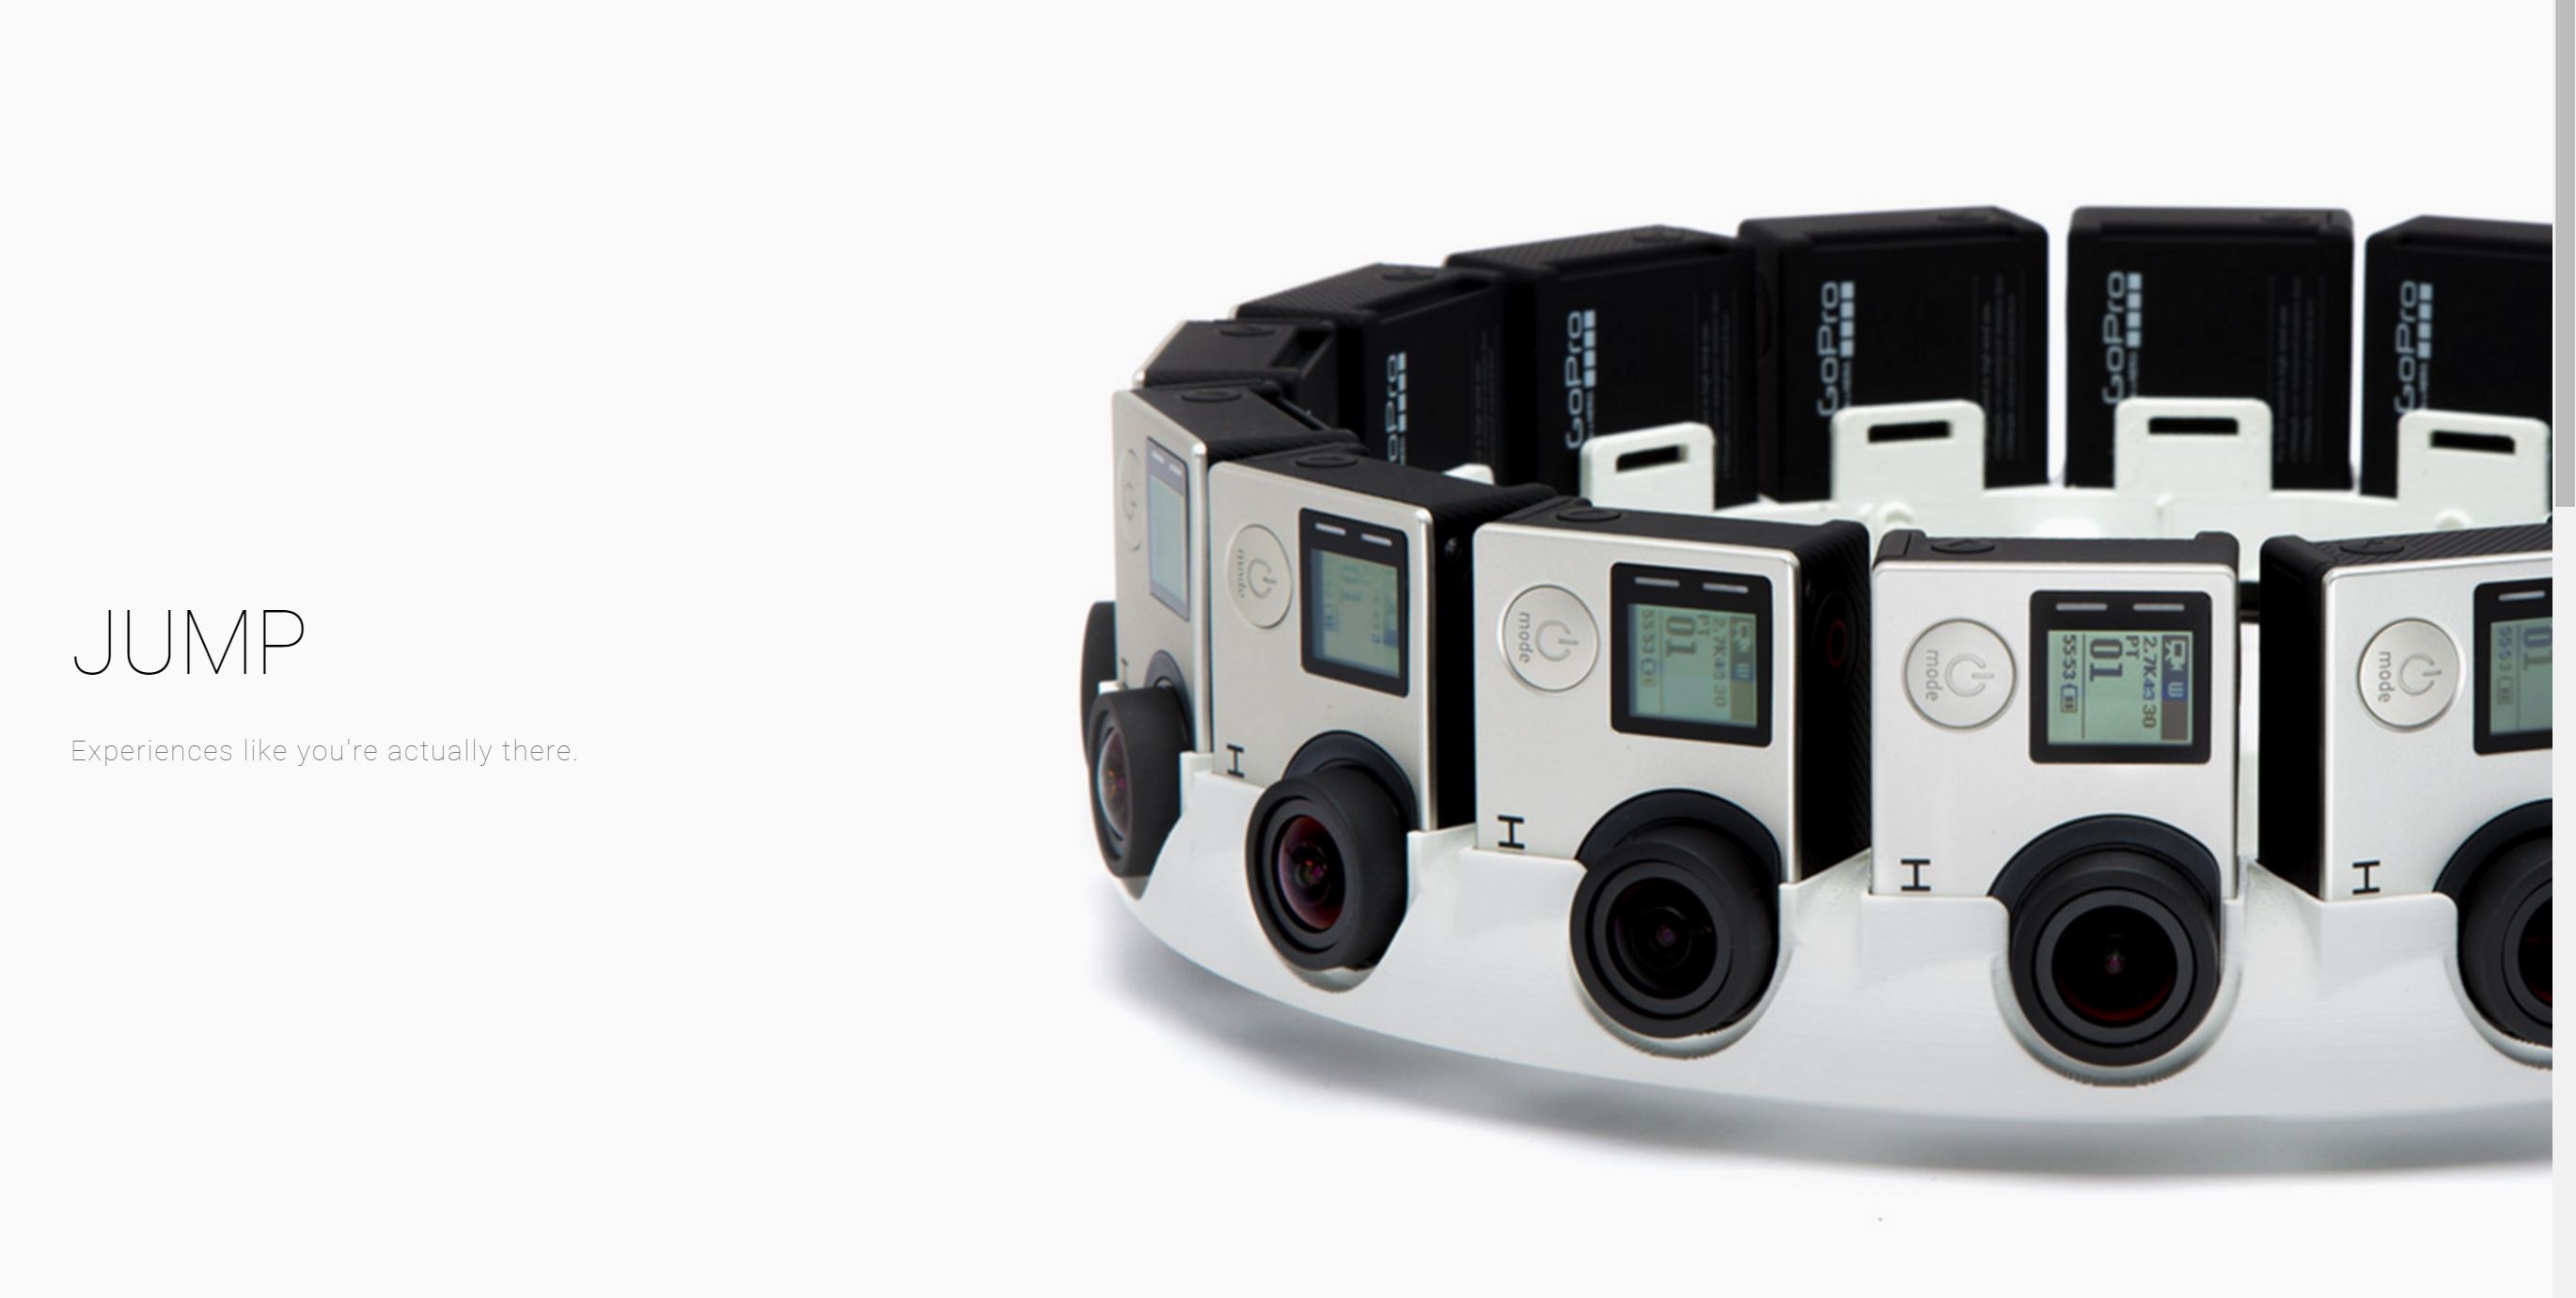 Google announces new VR platform called Jump – GoPro ‘Jumps’ on board with their 360 degree camera array